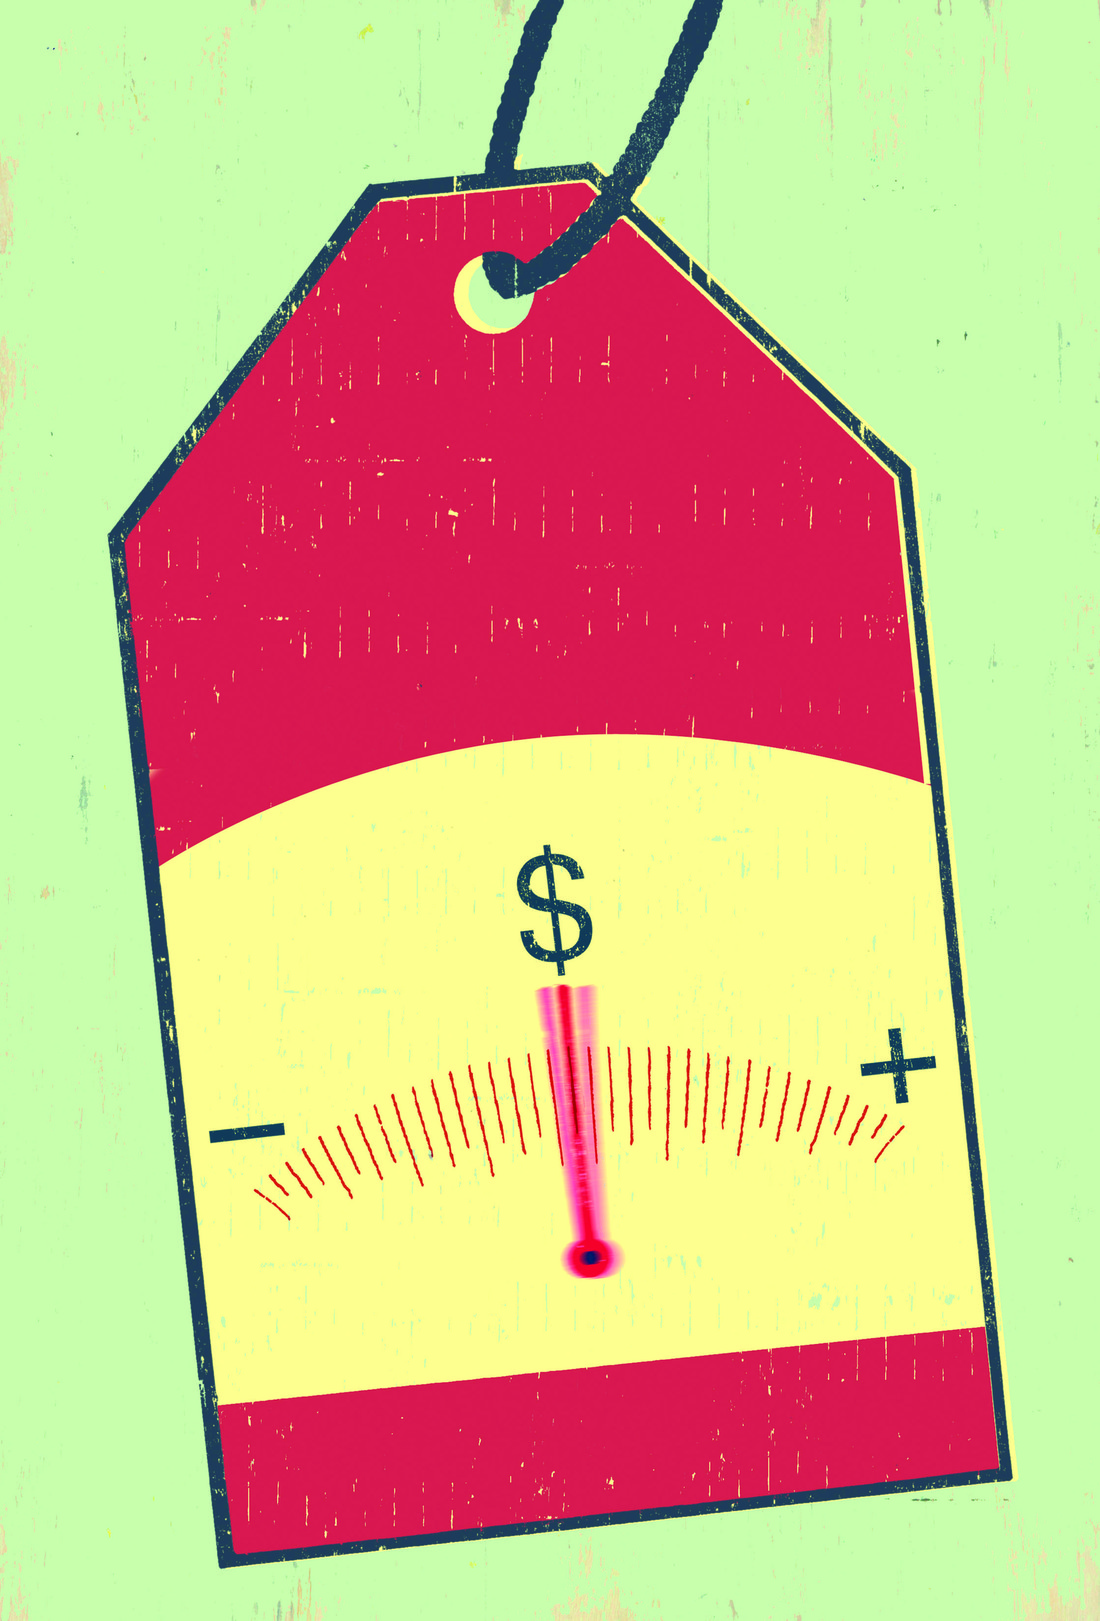 Image of a price tag with a plus and minus sign and a needle in the middle